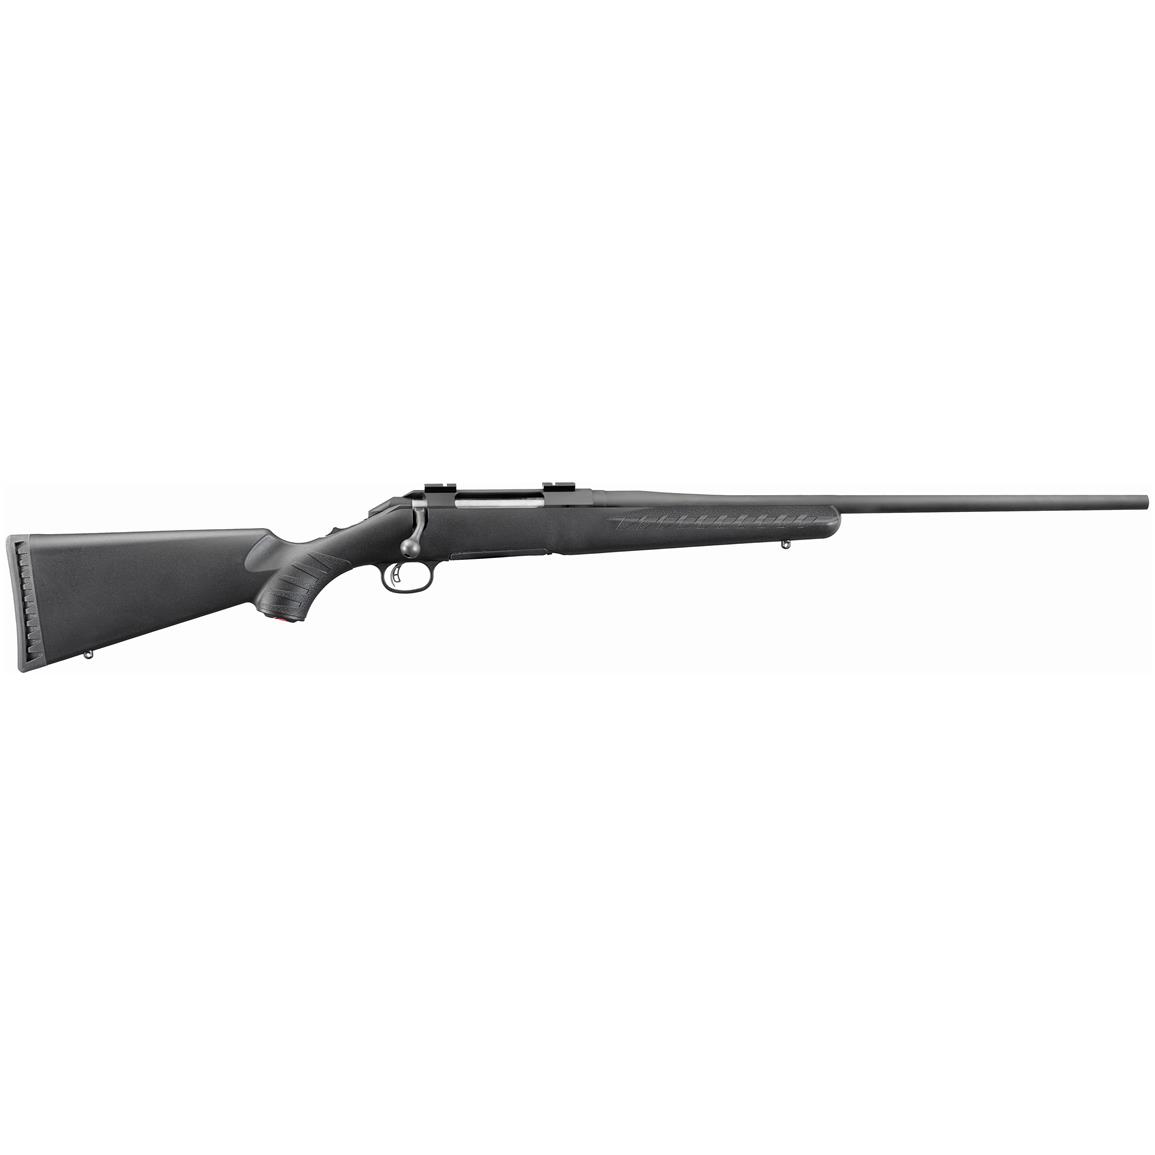 Ruger American Rifle, Bolt Action, .243 Winchester, Centerfire, 22" Barrel, 4 Rounds